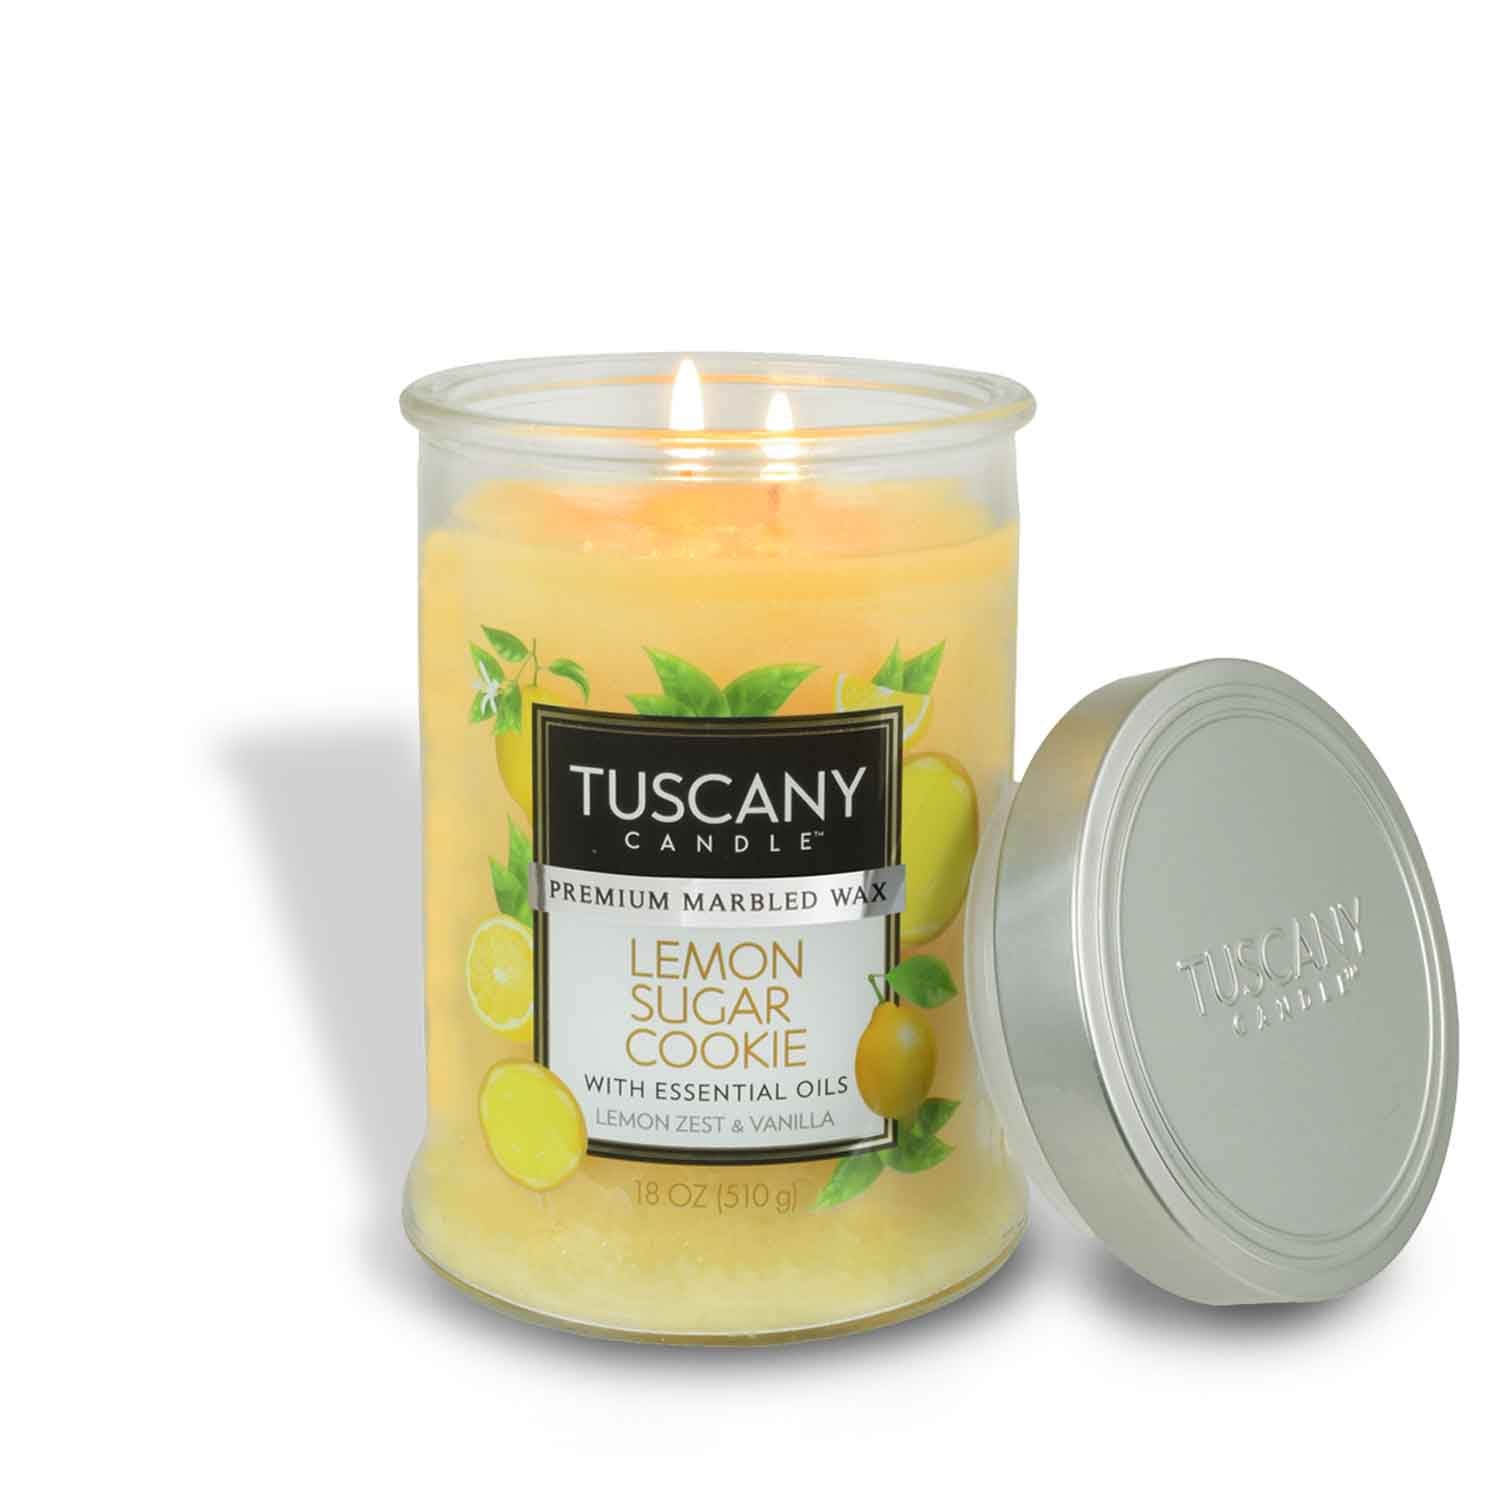 With notes of lemon zest and vanilla, Lemon Sugar Cookie is one of our most popular cookie-scented candles